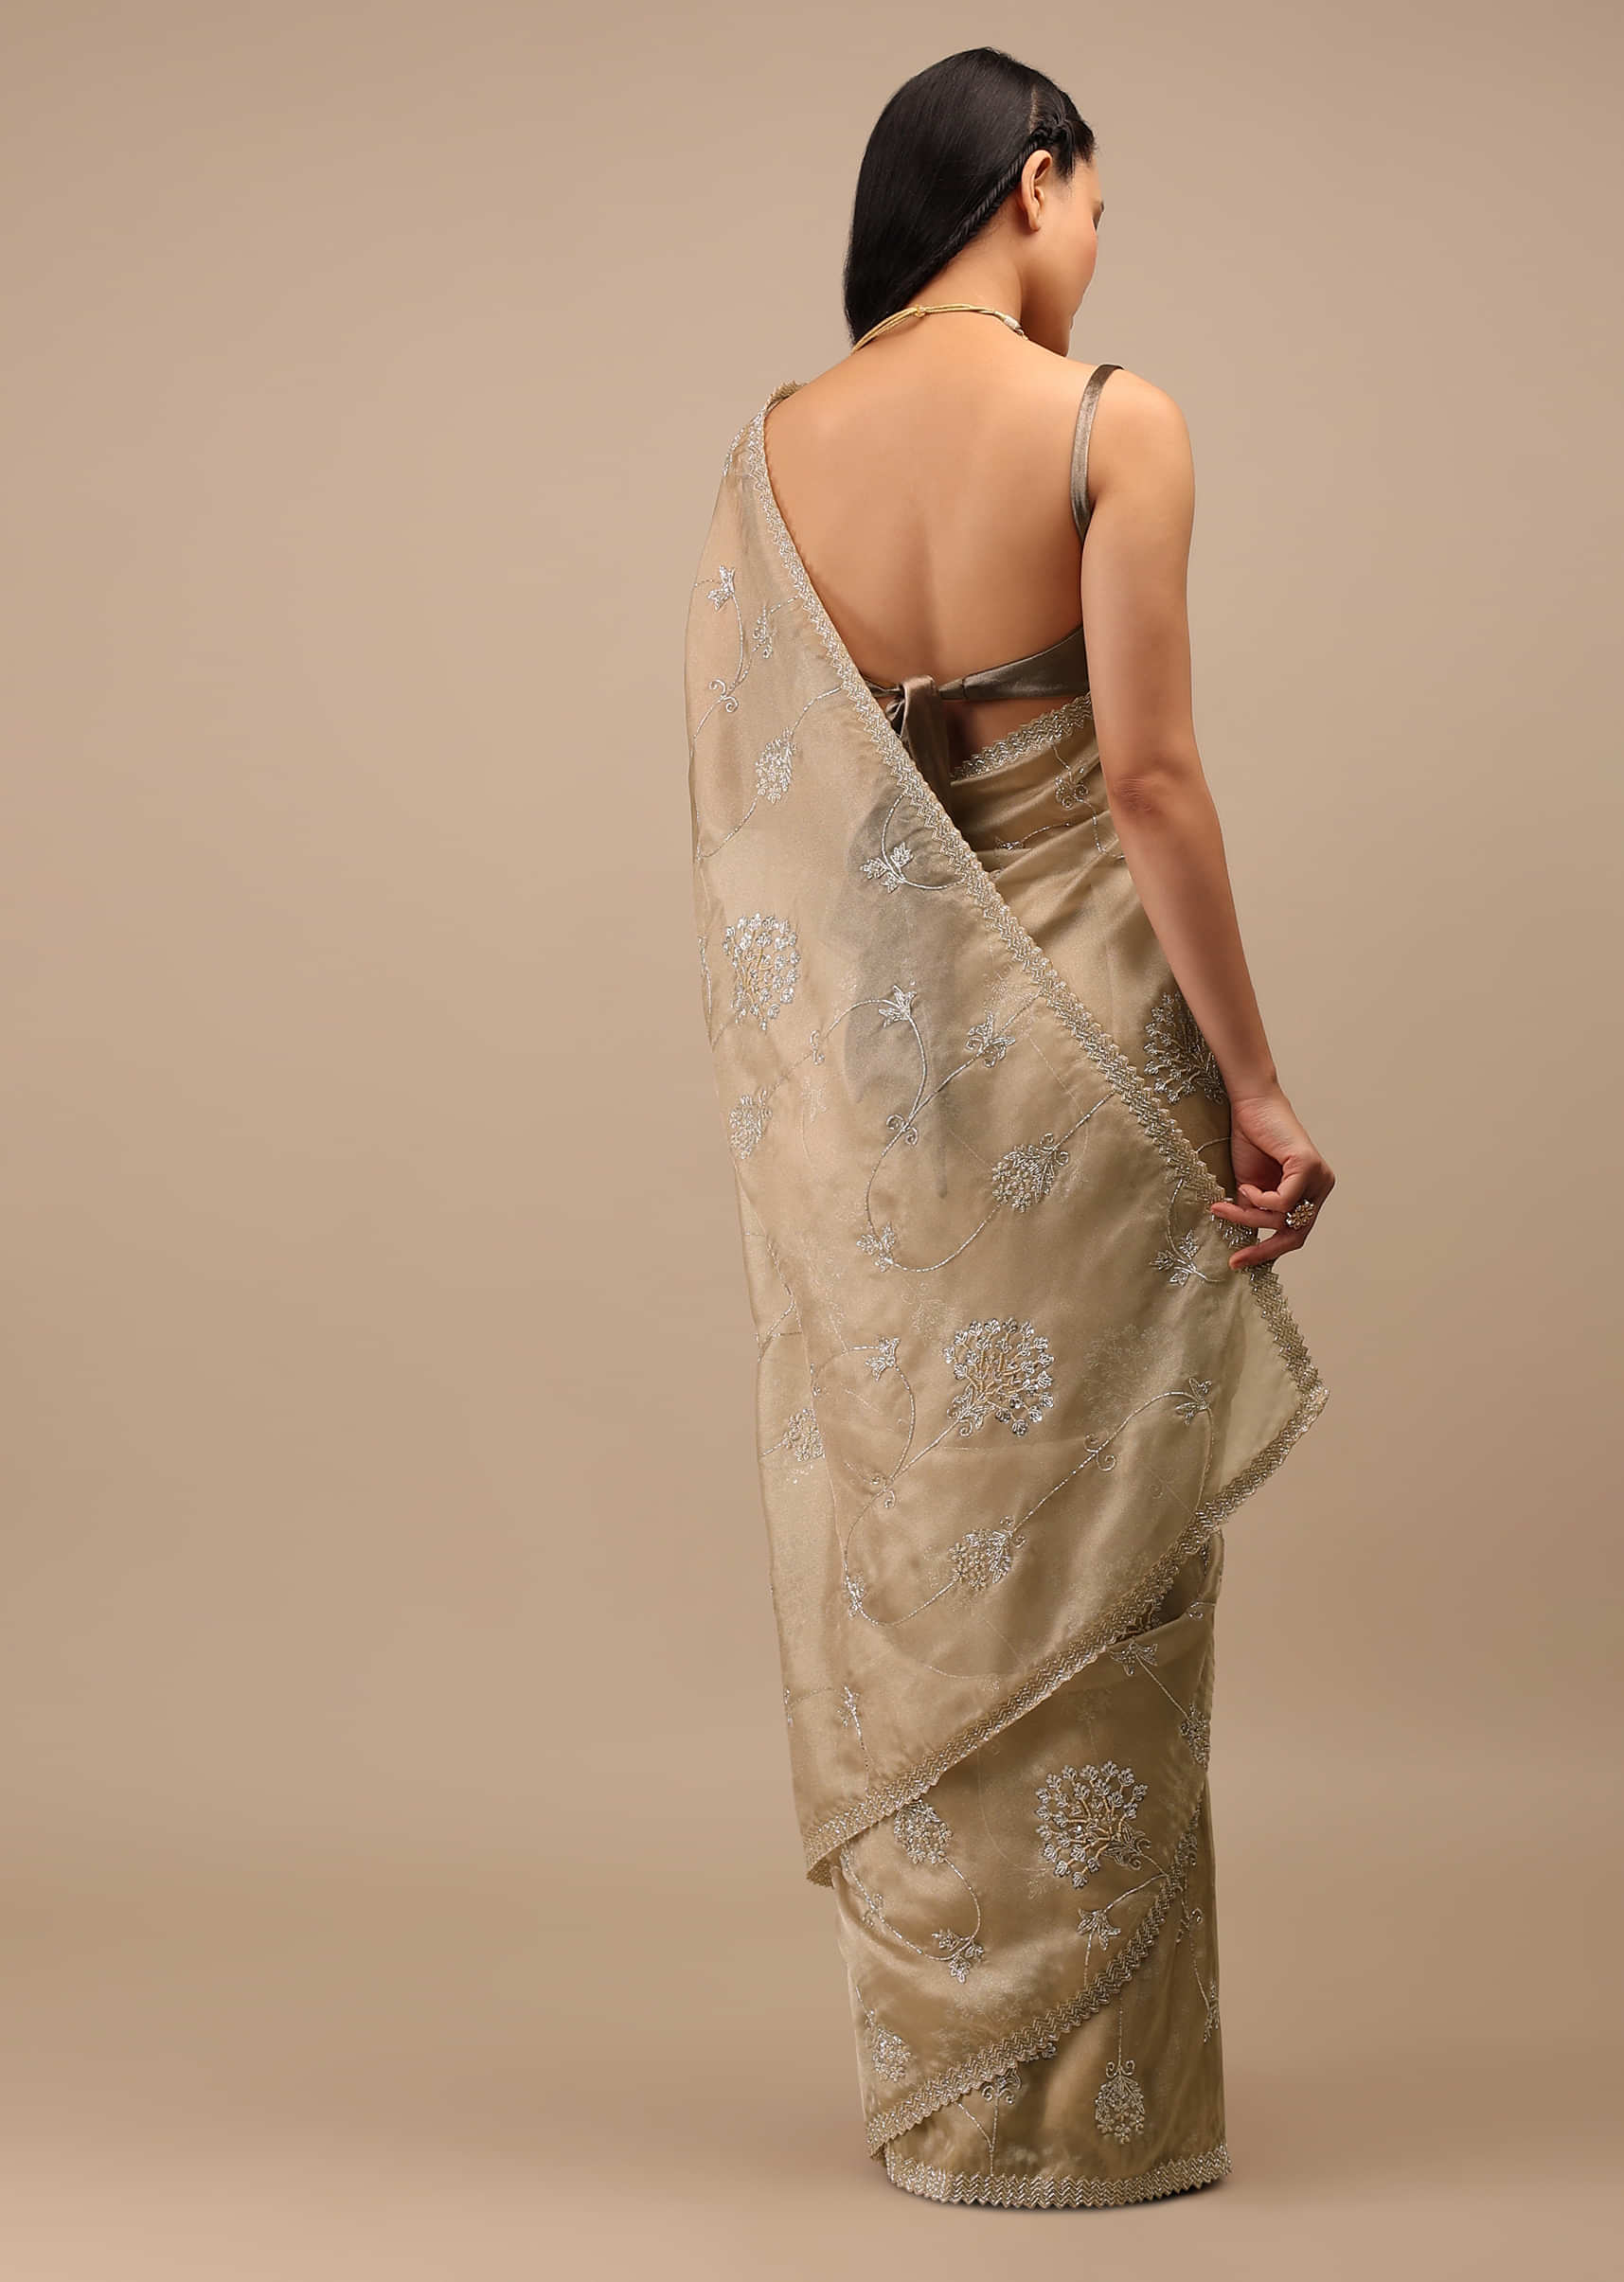 Frosted Almond Tissue Saree In Zardozi Embroidery Buttis, Leafy Motifs Embroidery Detailing On Border 